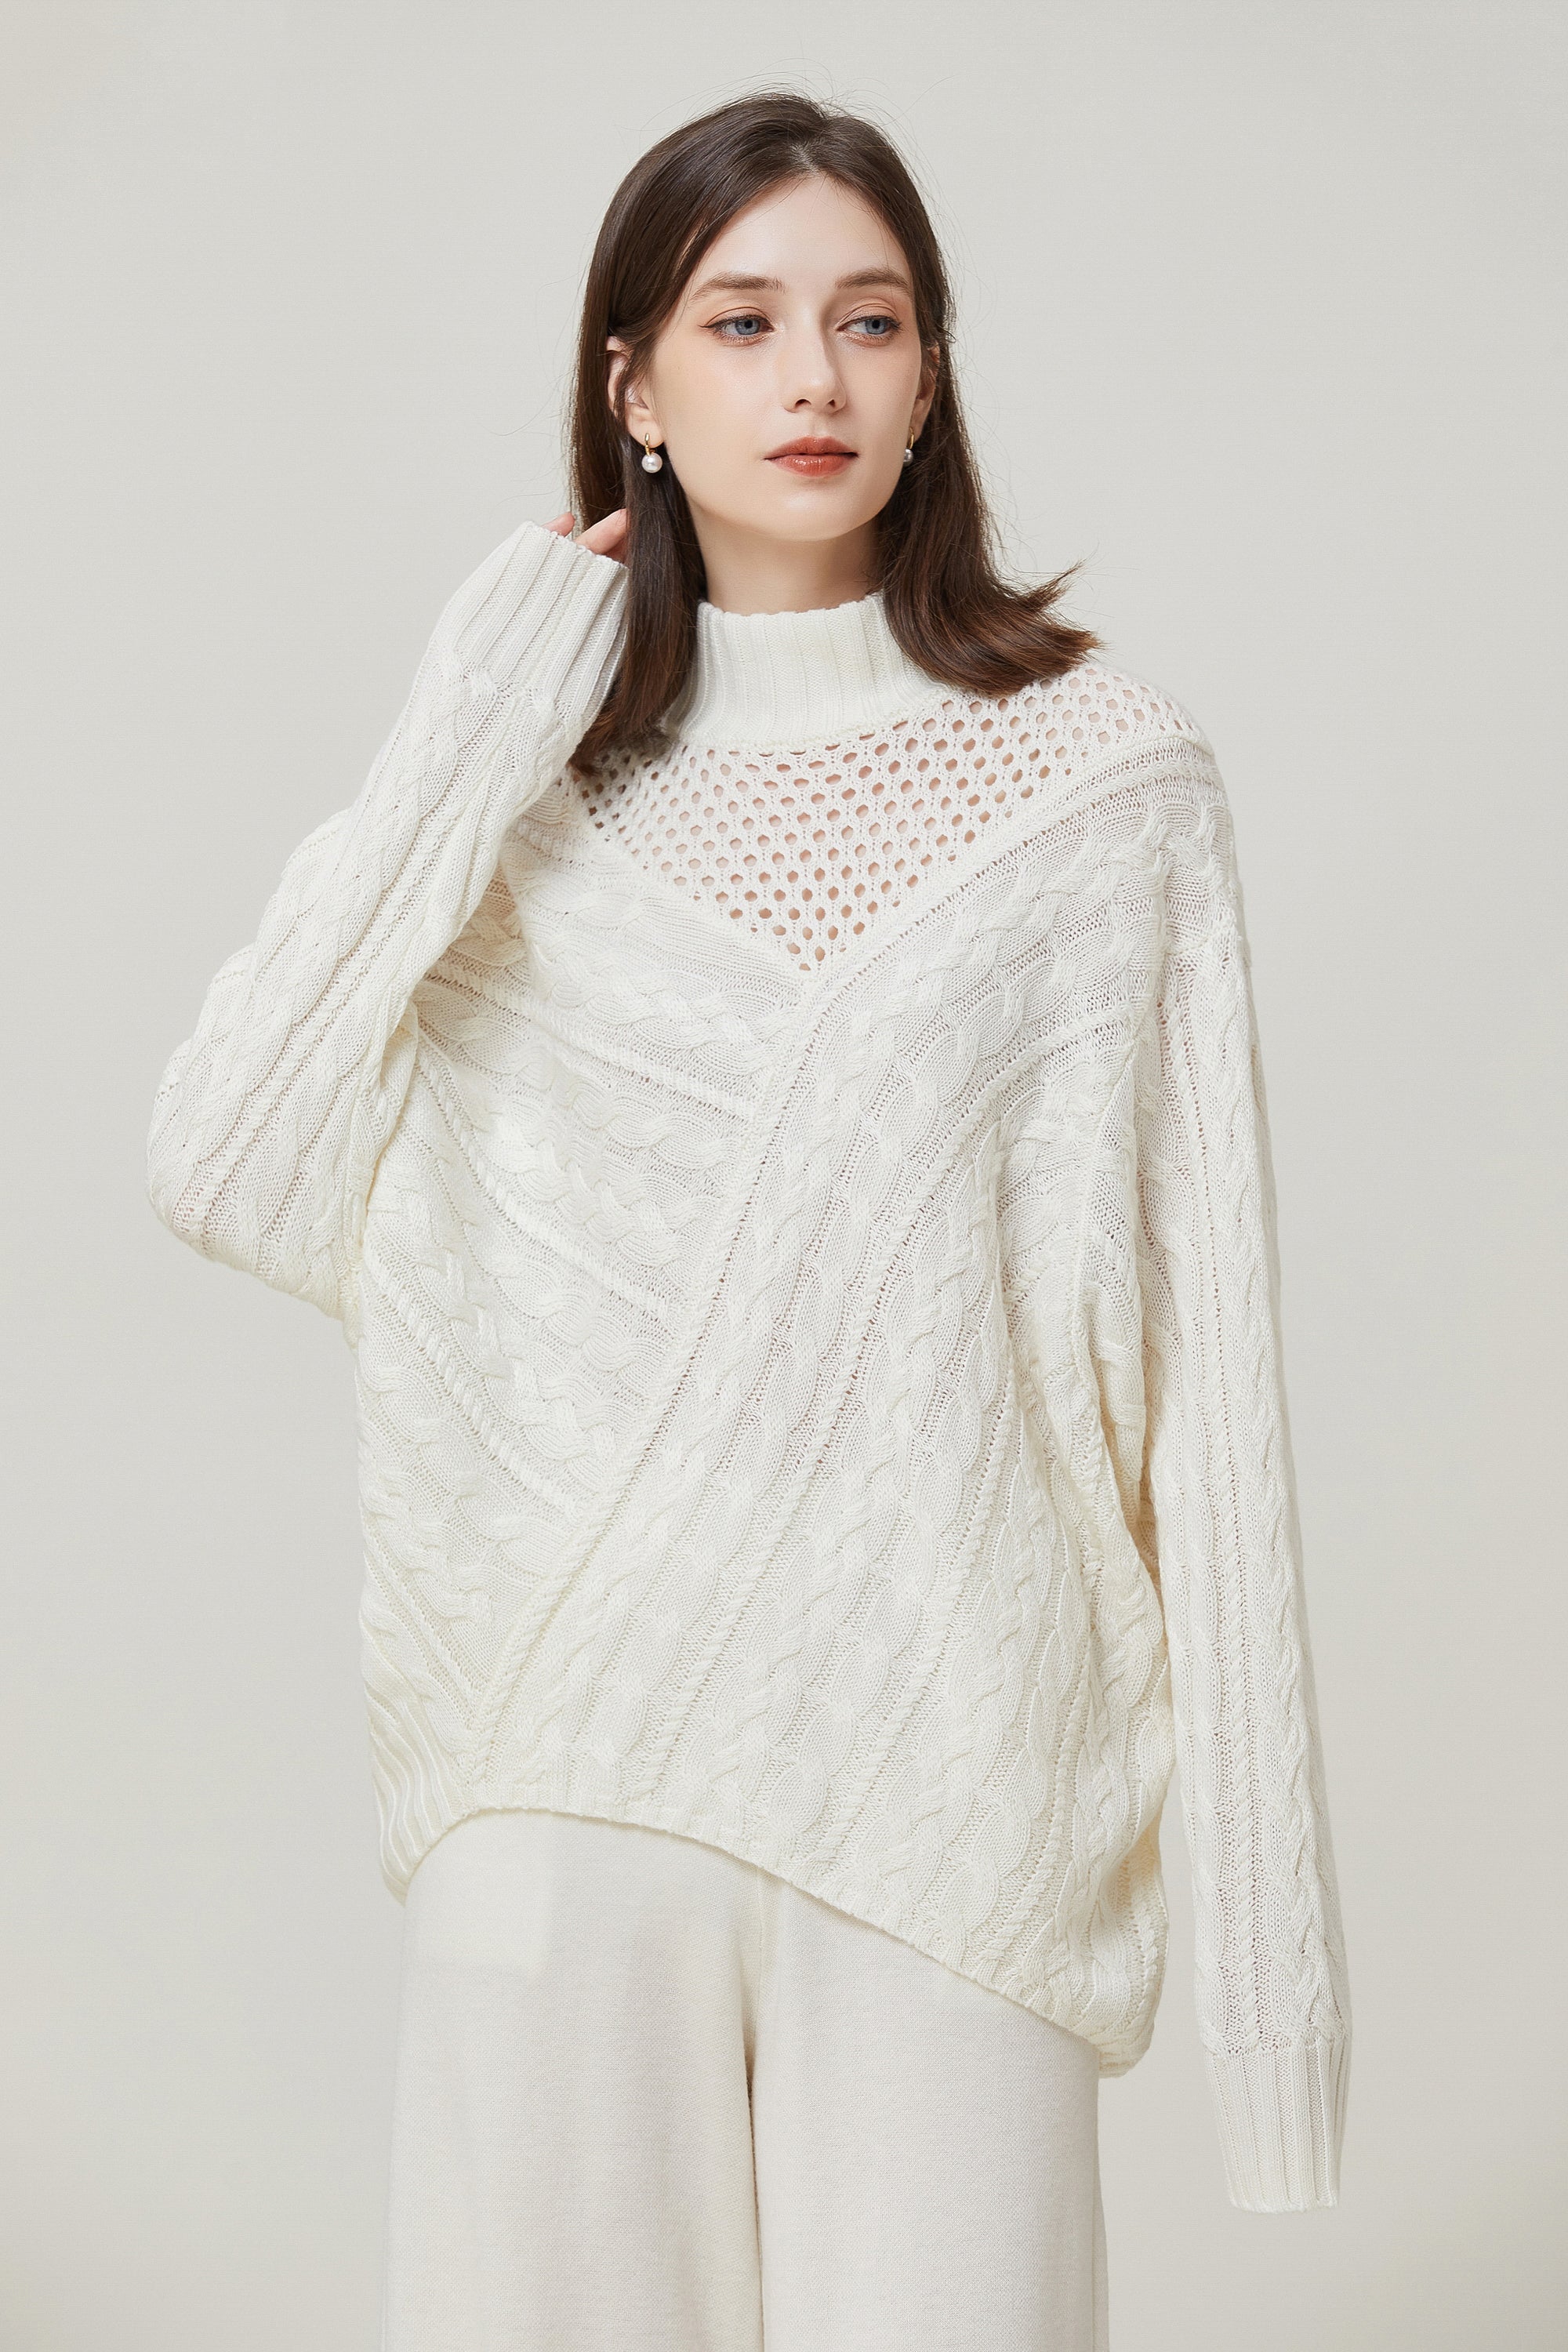 Sylphide | Edmee White Wool Sweater